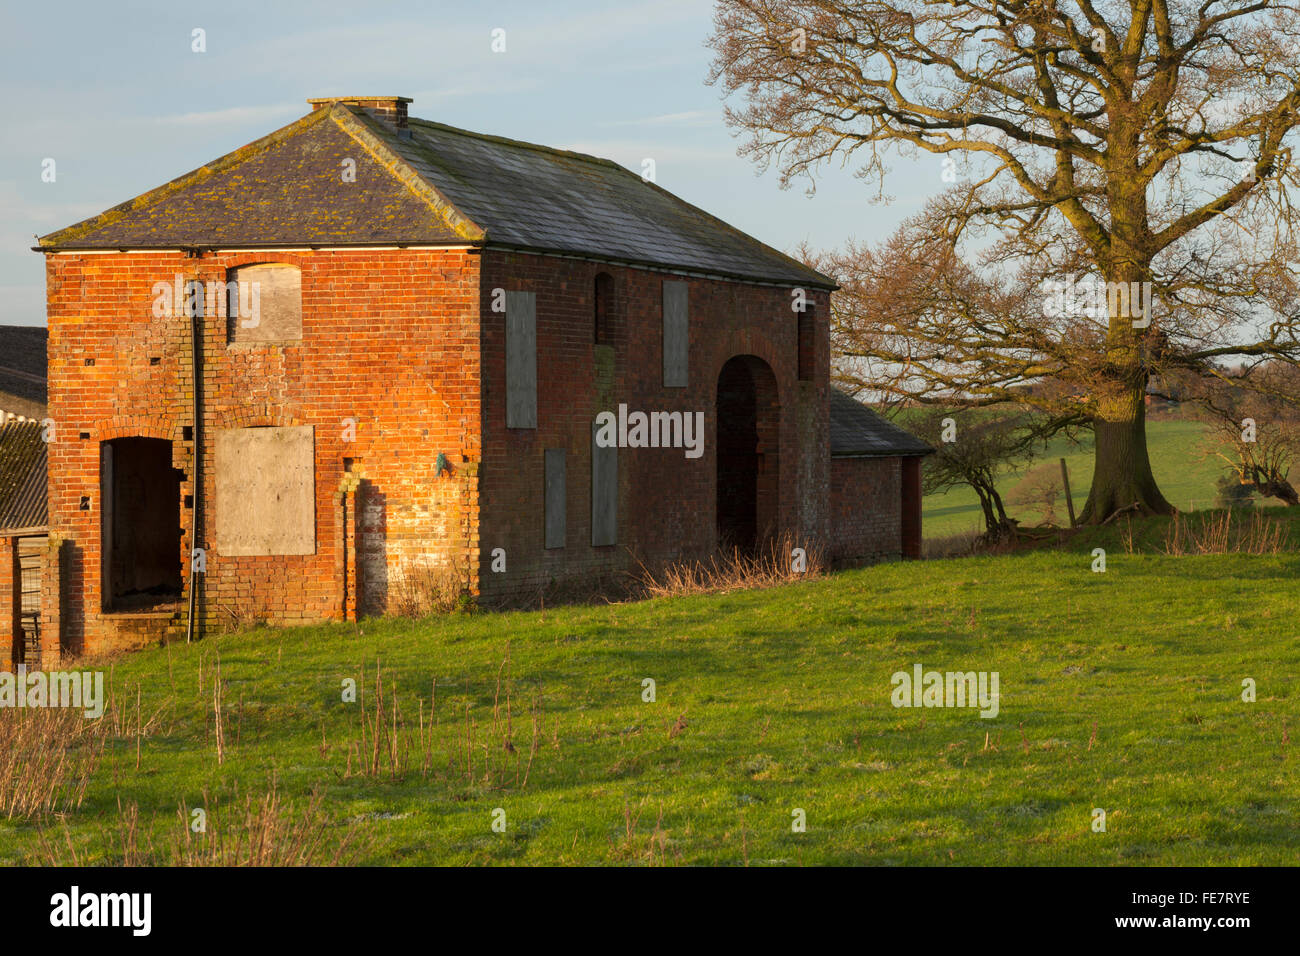 An old deserted farmhouse with boarded up windows and brickwork bathed in winter sunshine, Northamptonshire, England Stock Photo